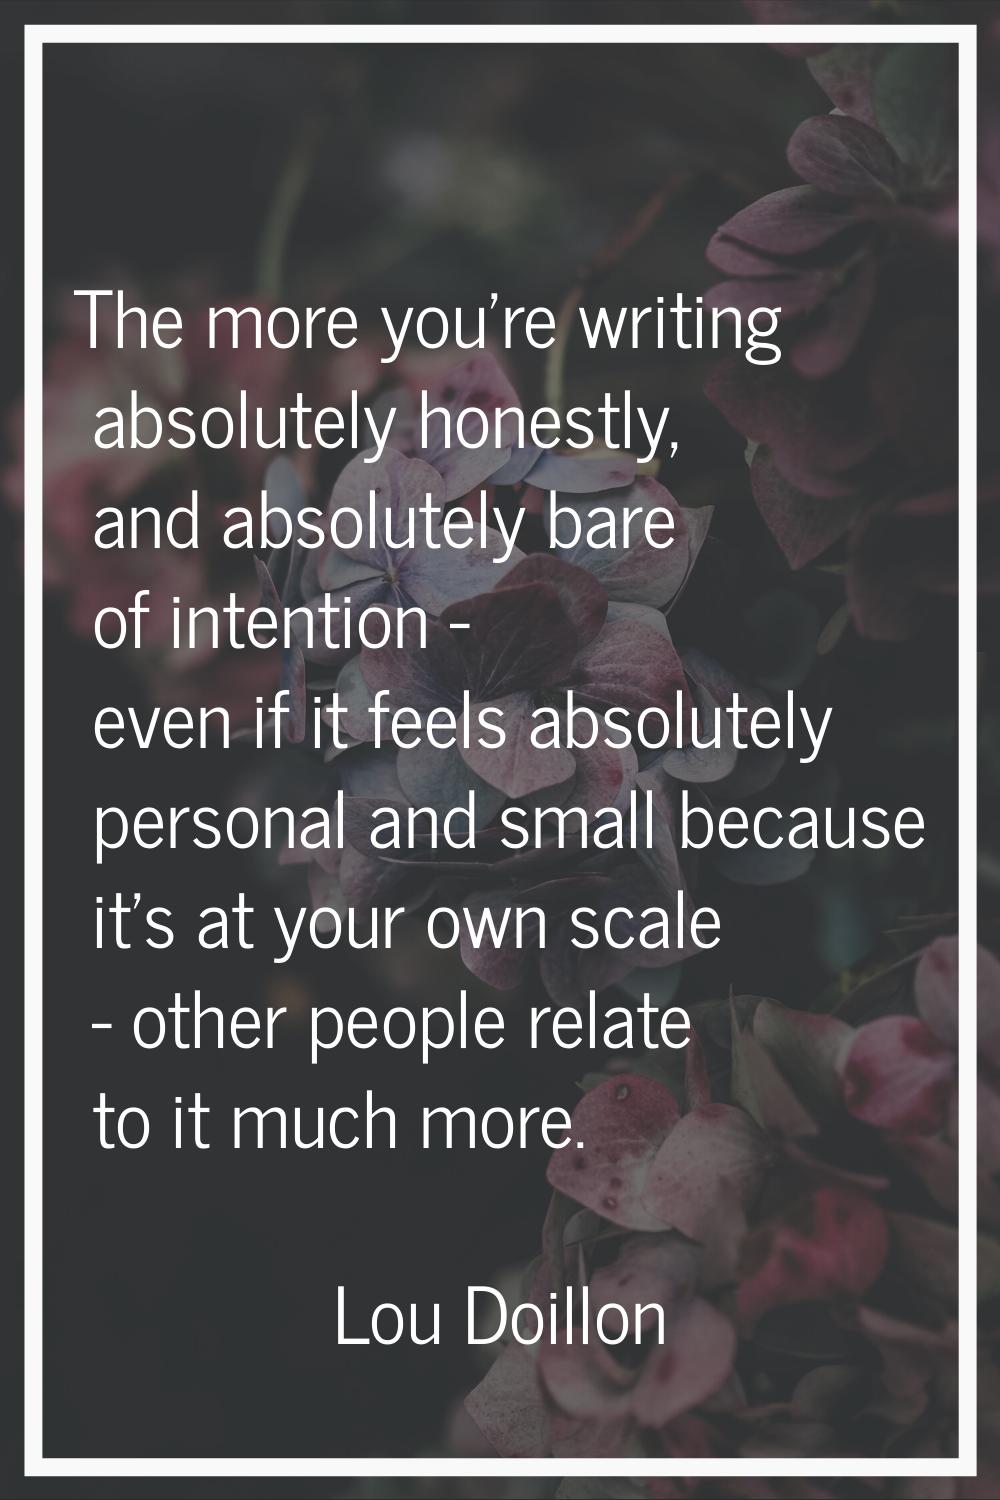 The more you're writing absolutely honestly, and absolutely bare of intention - even if it feels ab